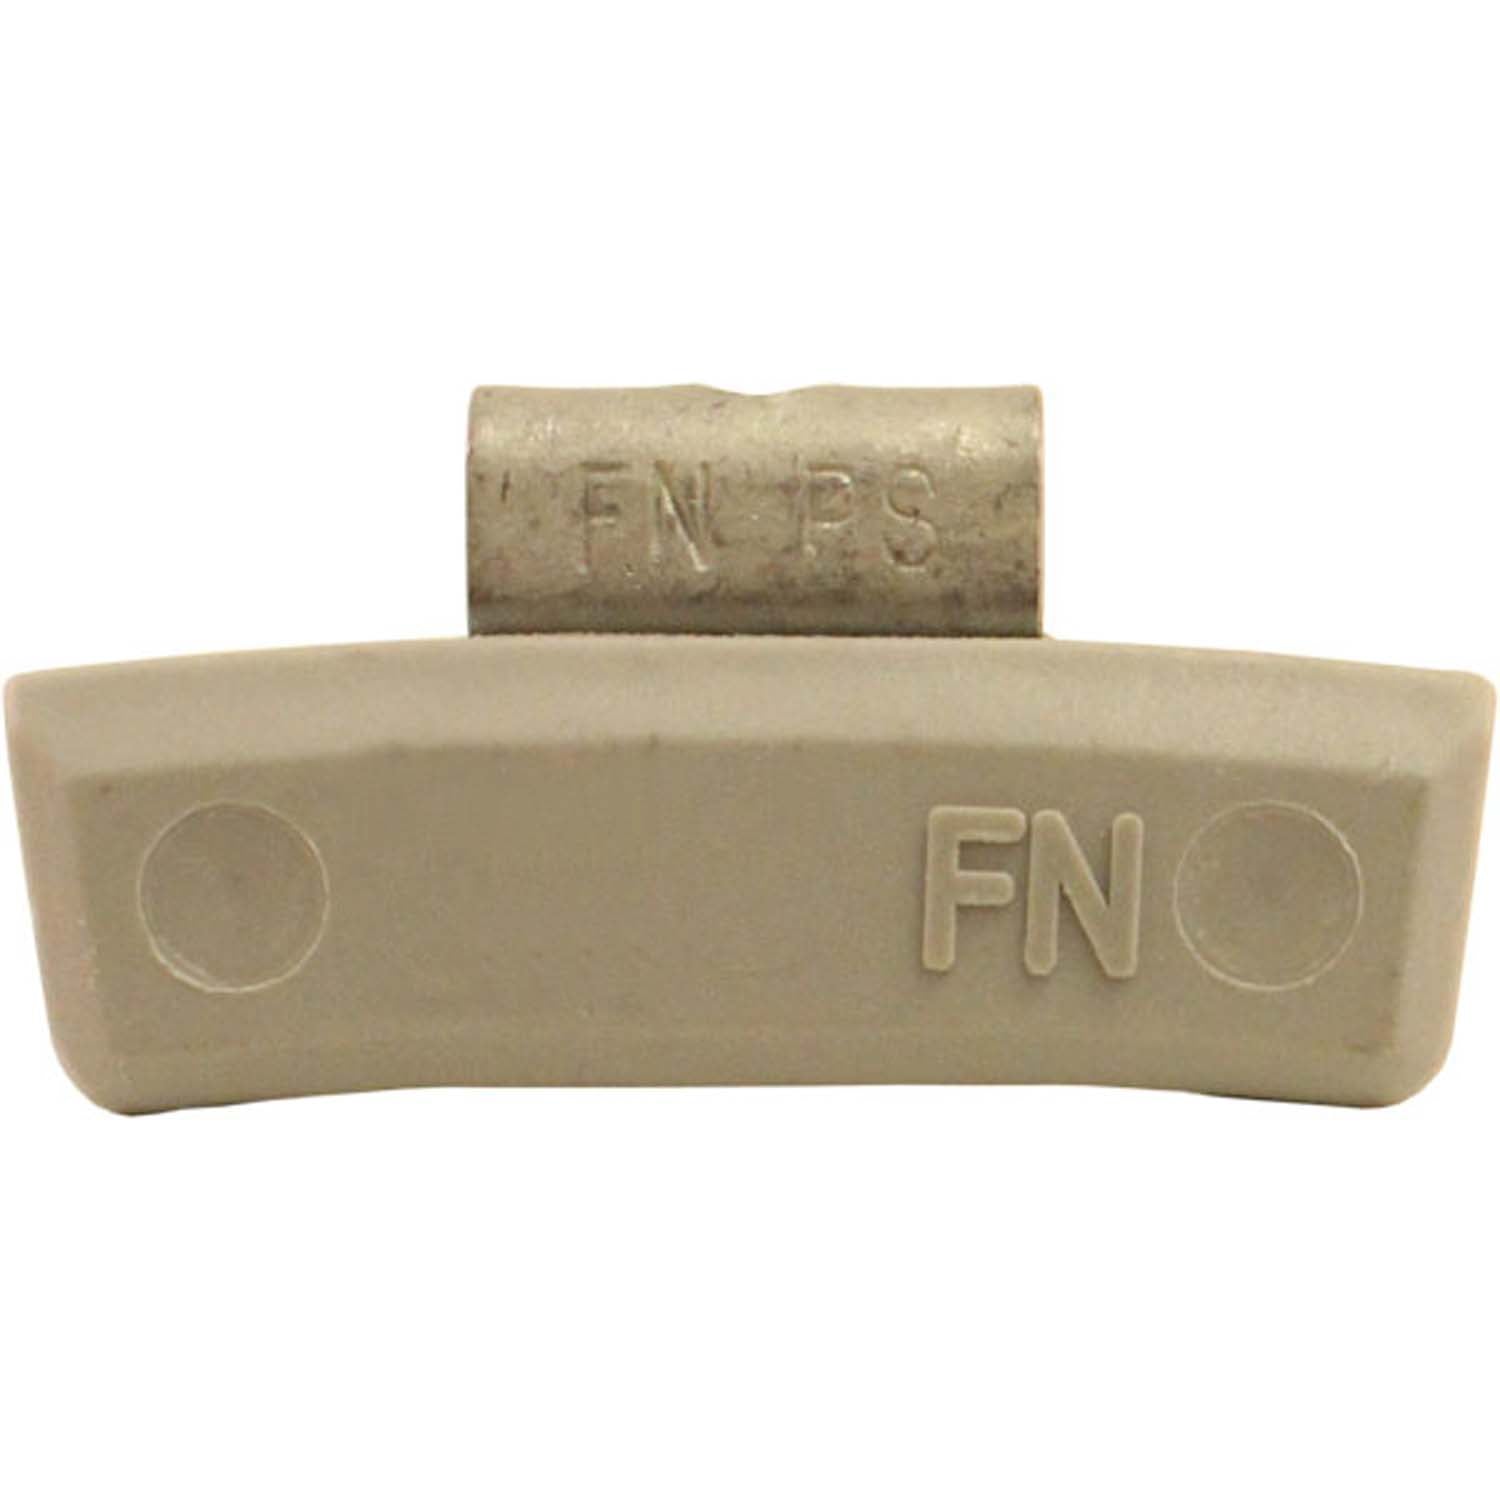 Plombco FNPS045 Plasteel Clip-On Wheel Weight 45gm - Box of 25